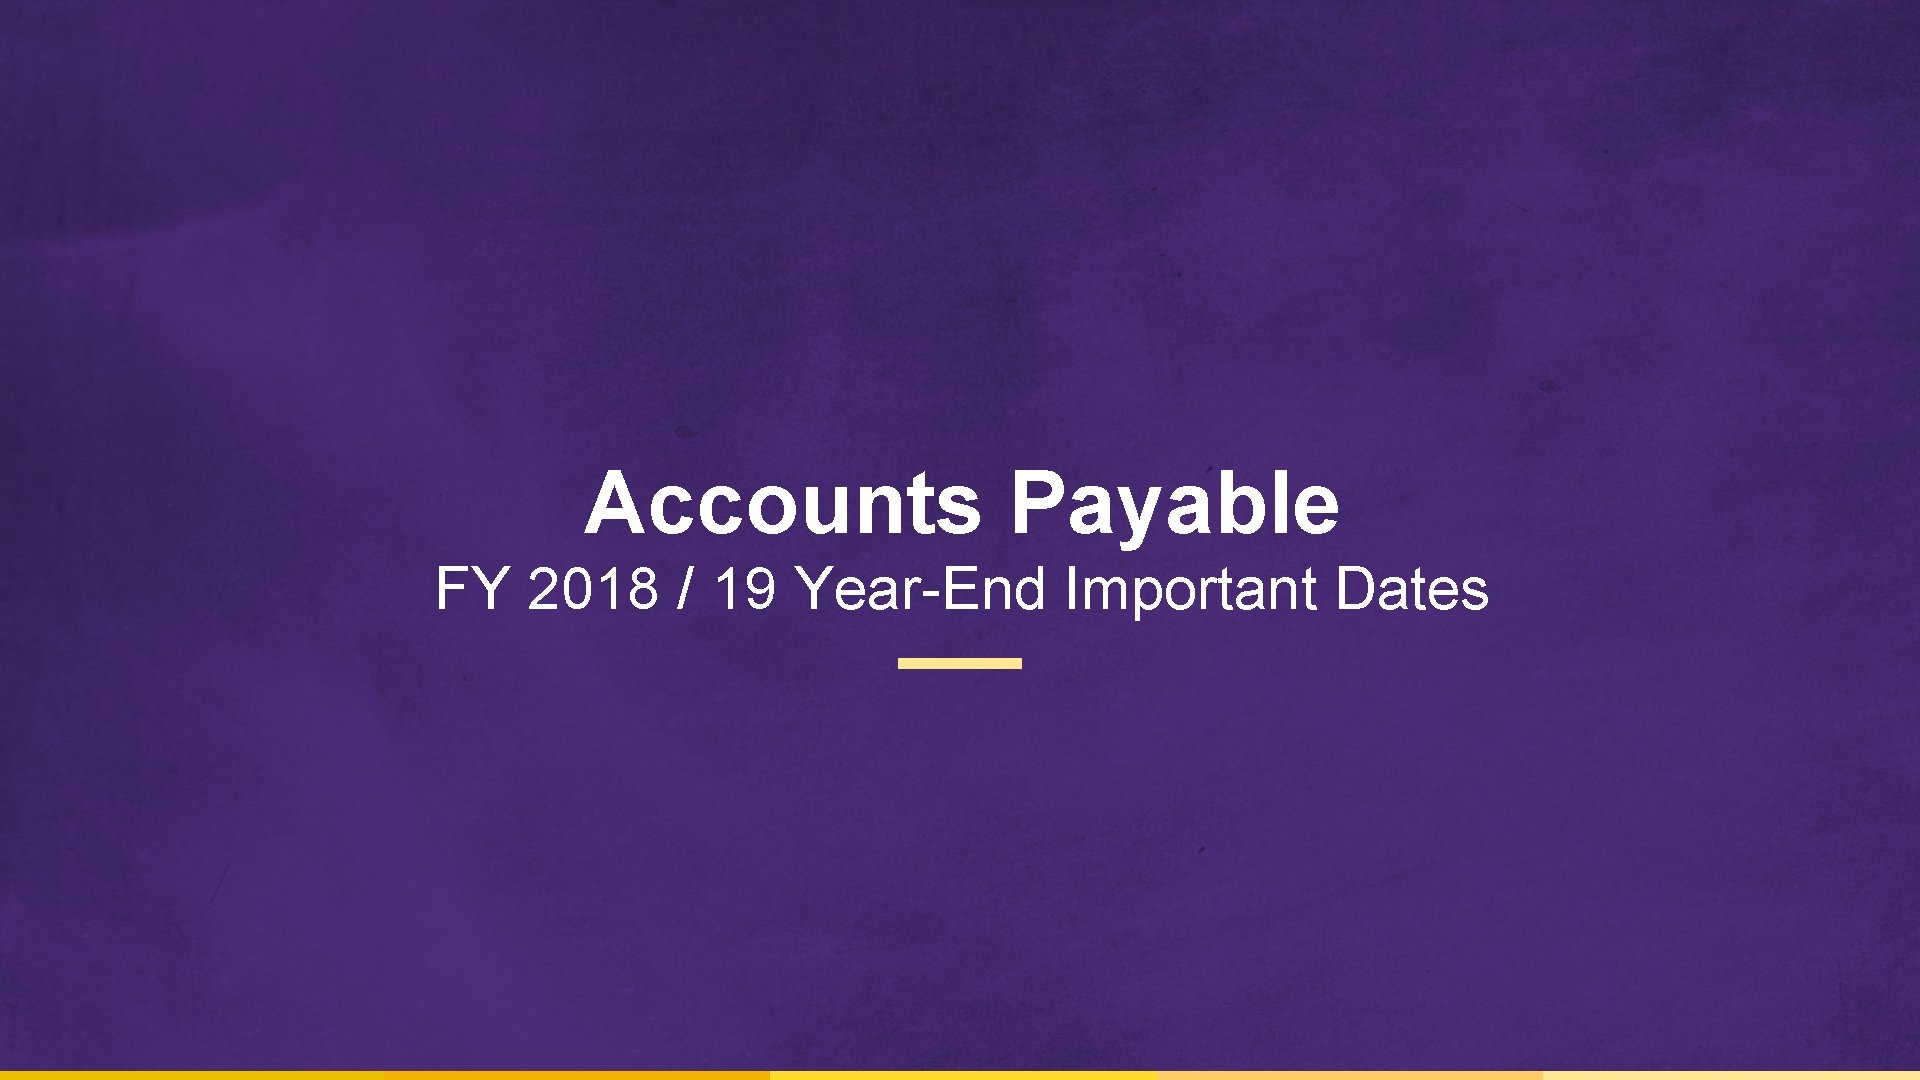 Accounts Payable FY 2018 / 19 Year-End Important Dates 